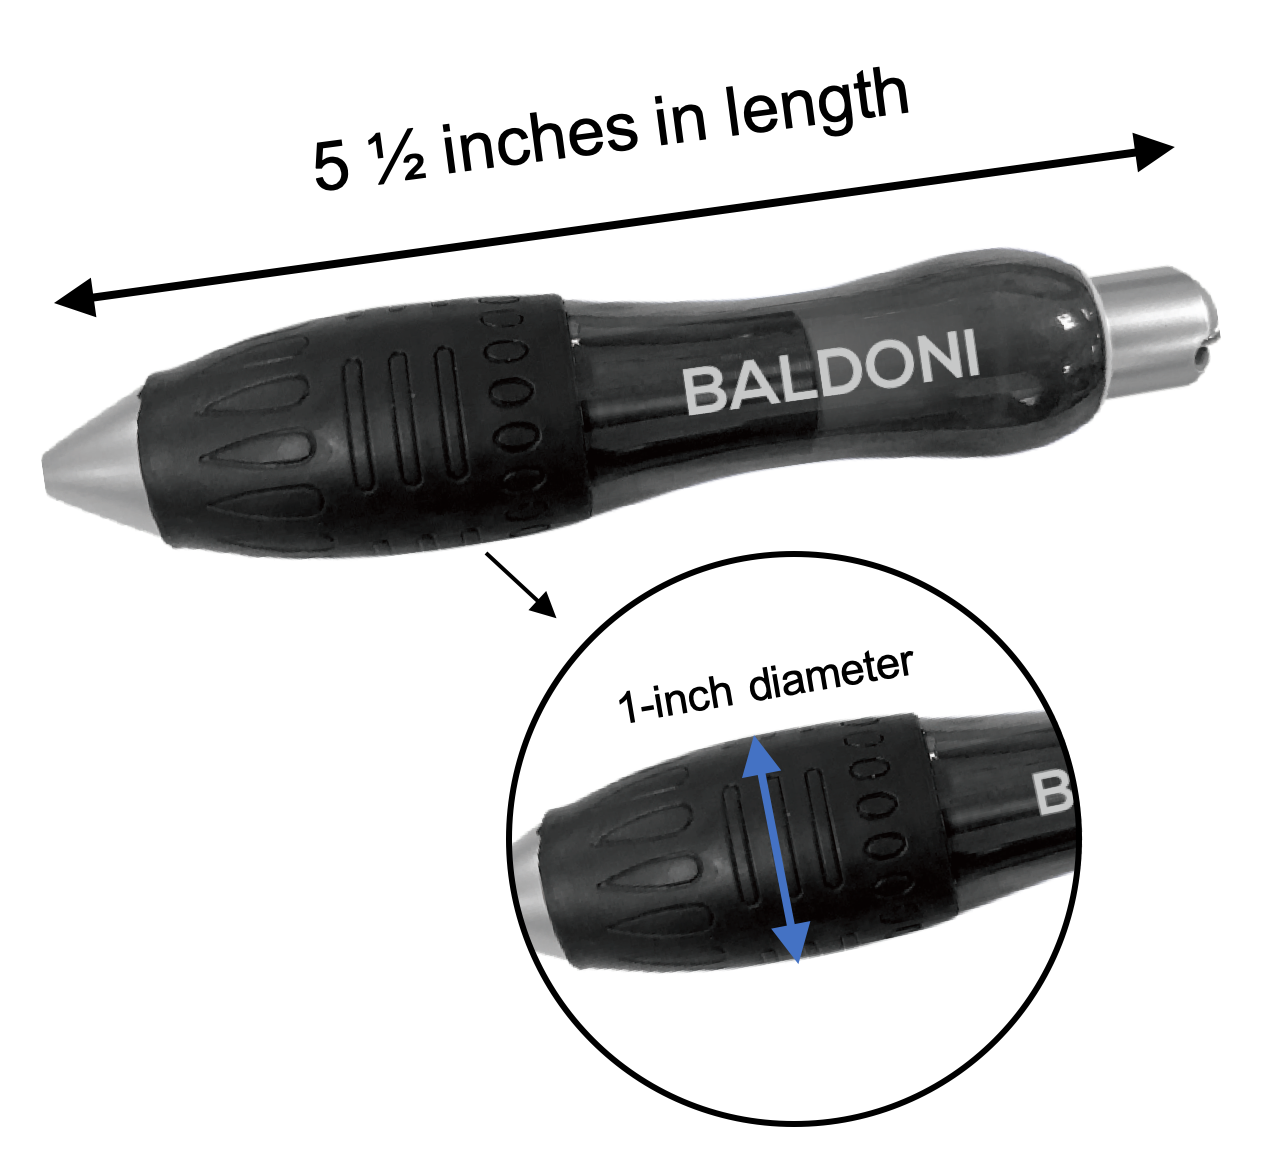 Heavy Weighted Pen - Wide Grip - Useful for Tremors, Parkinson's, Arthritis, Carpal Tunnel, Autism, or Fine Motor Skill Issue - Baldoni Neuromodulation